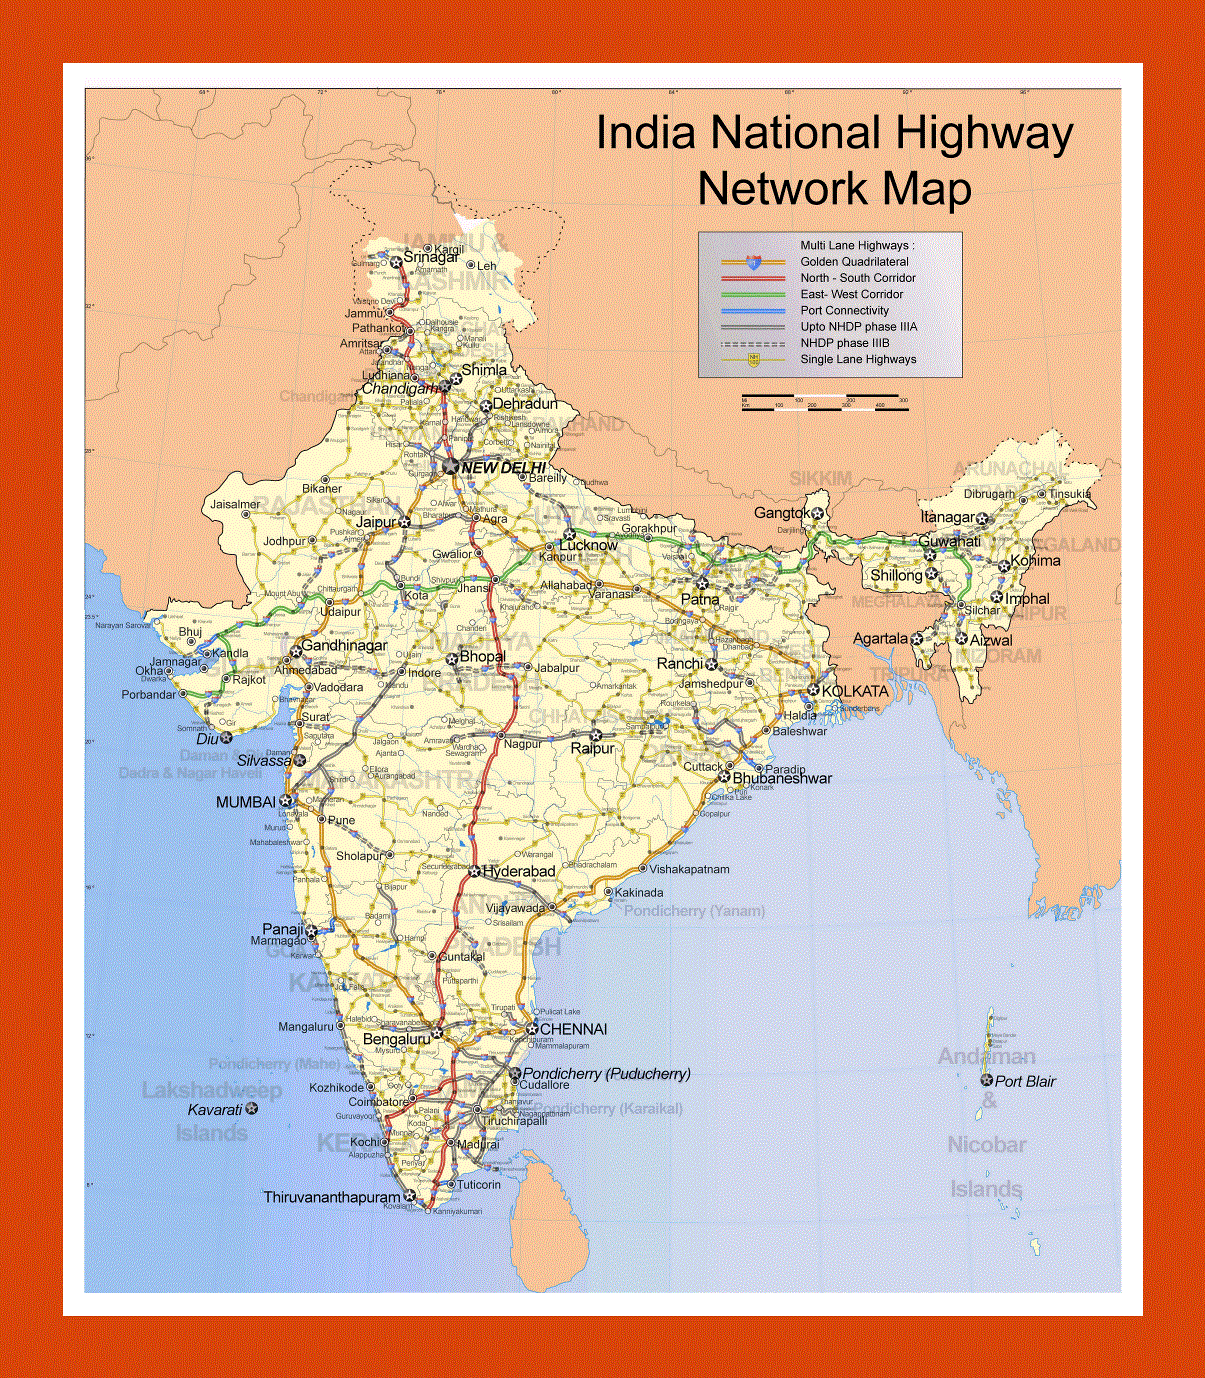 India National Highway Network map